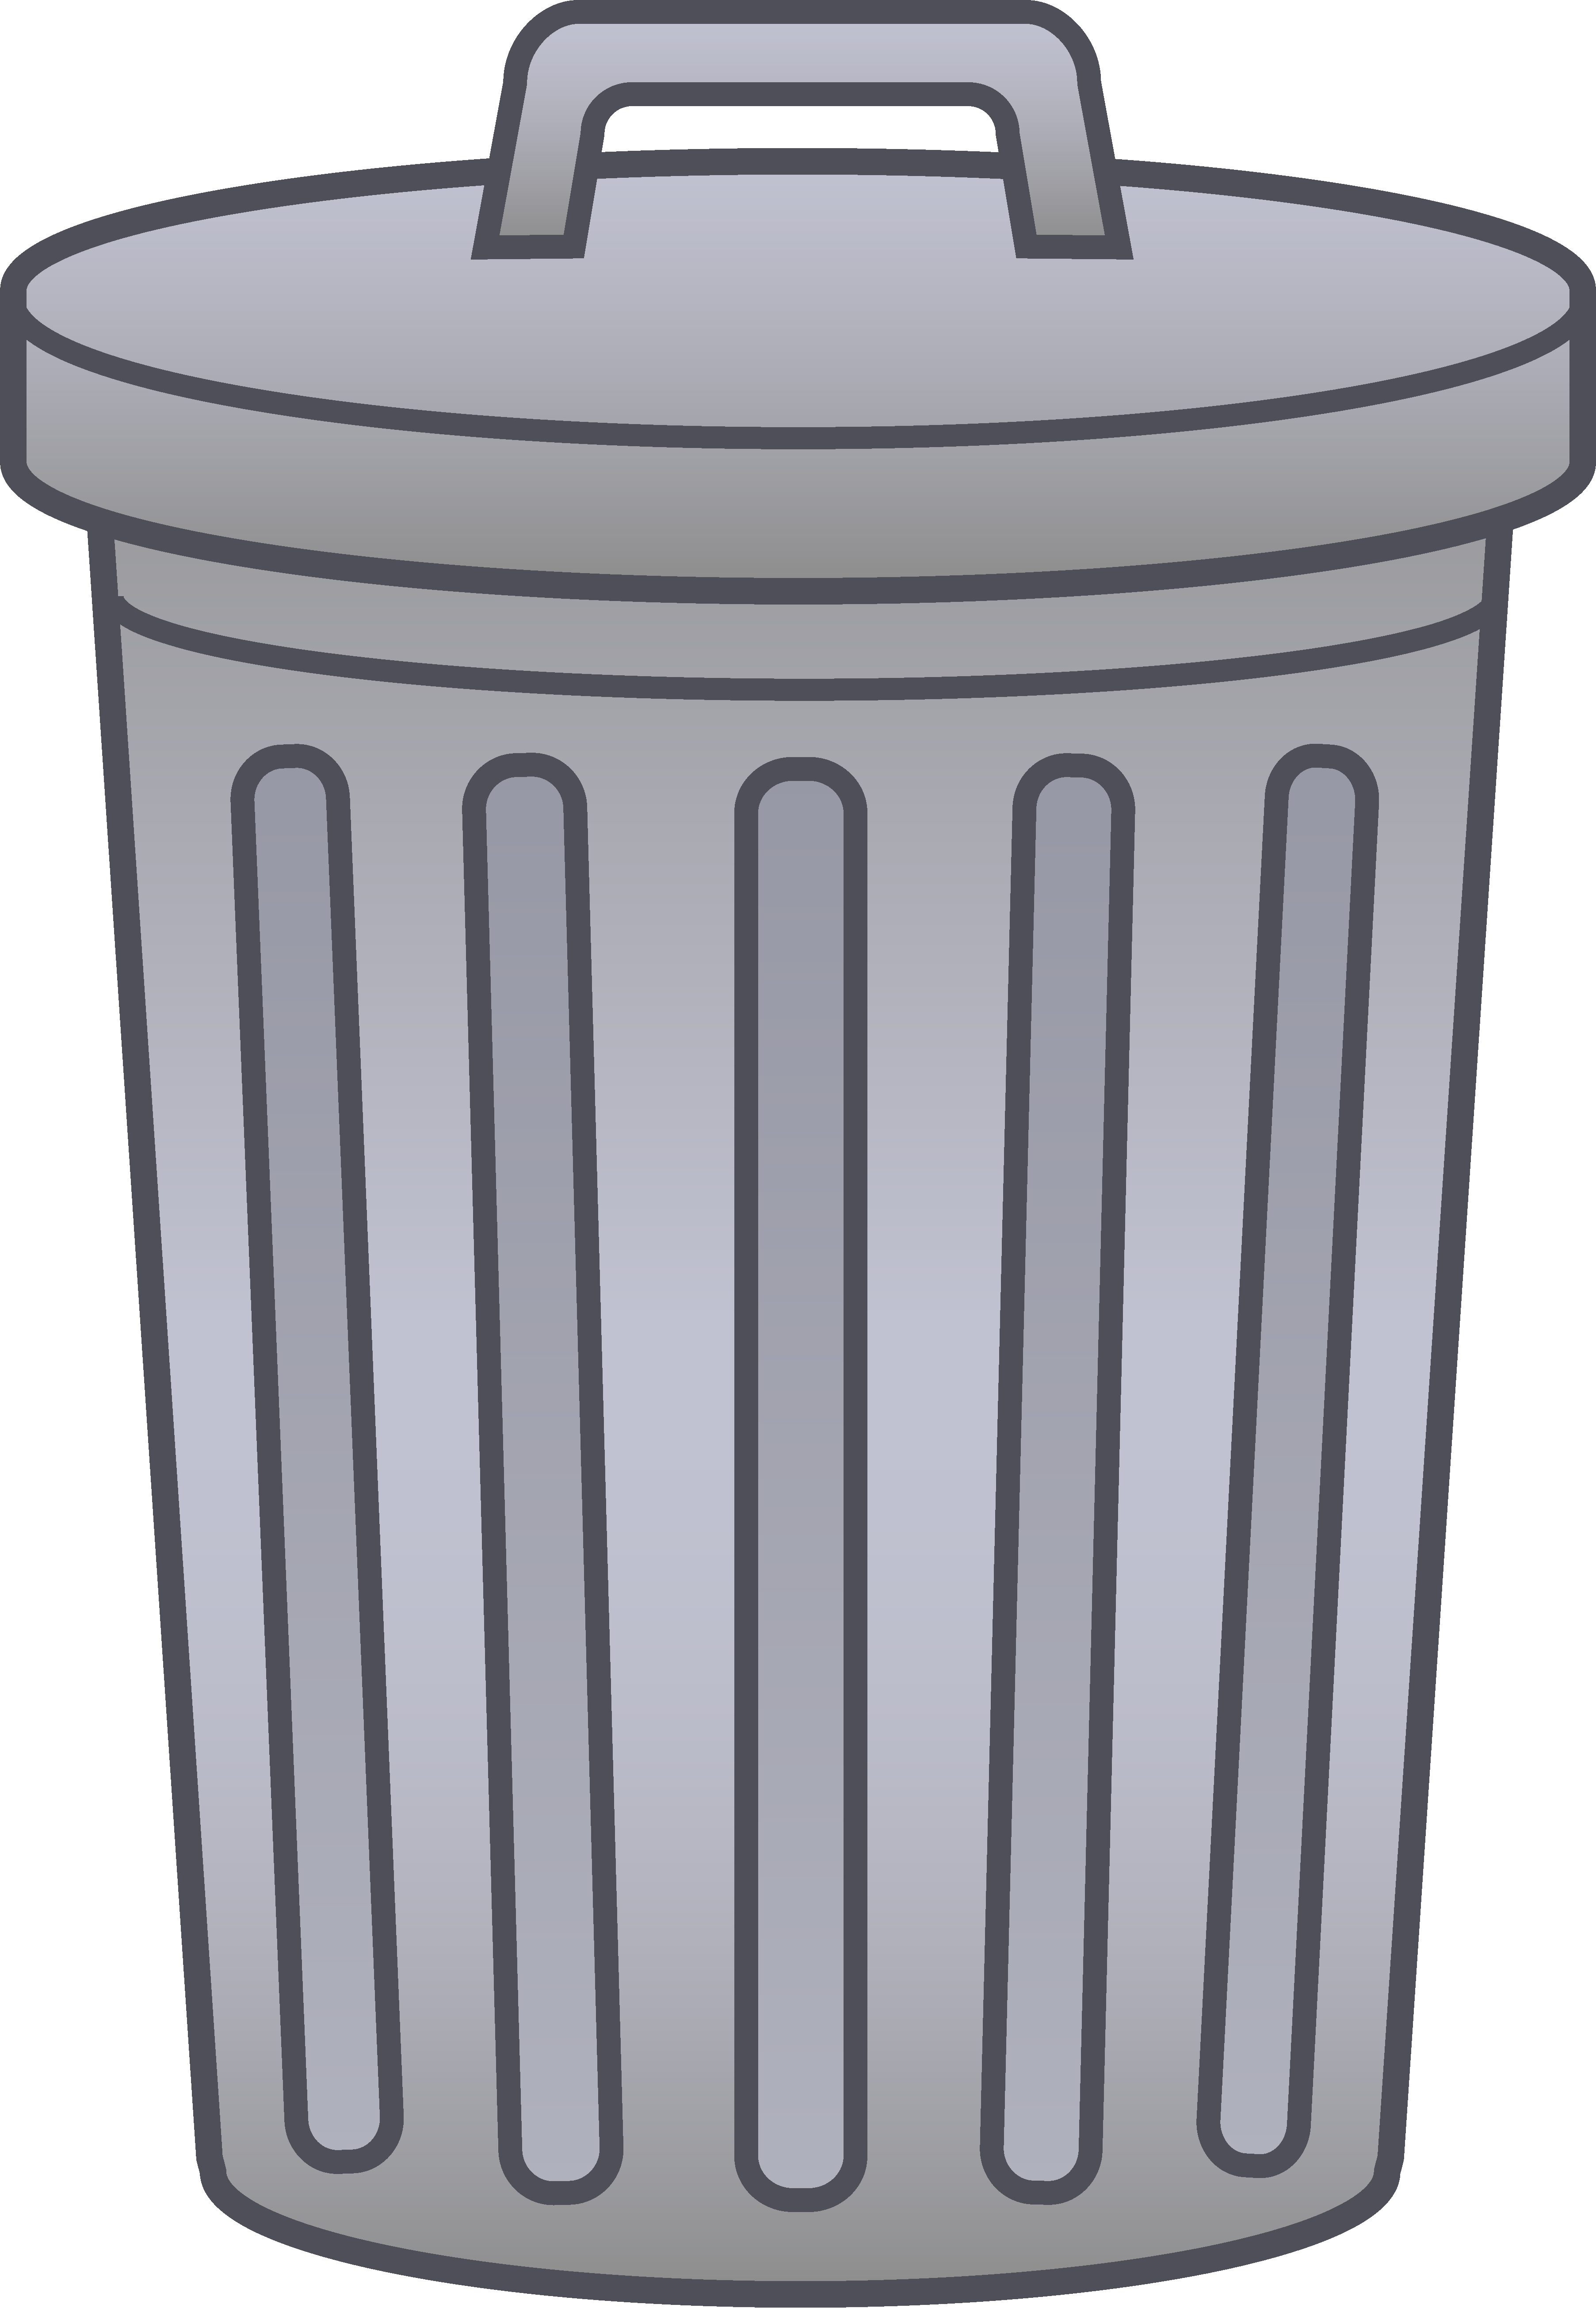 Trash Can Clipart Free.